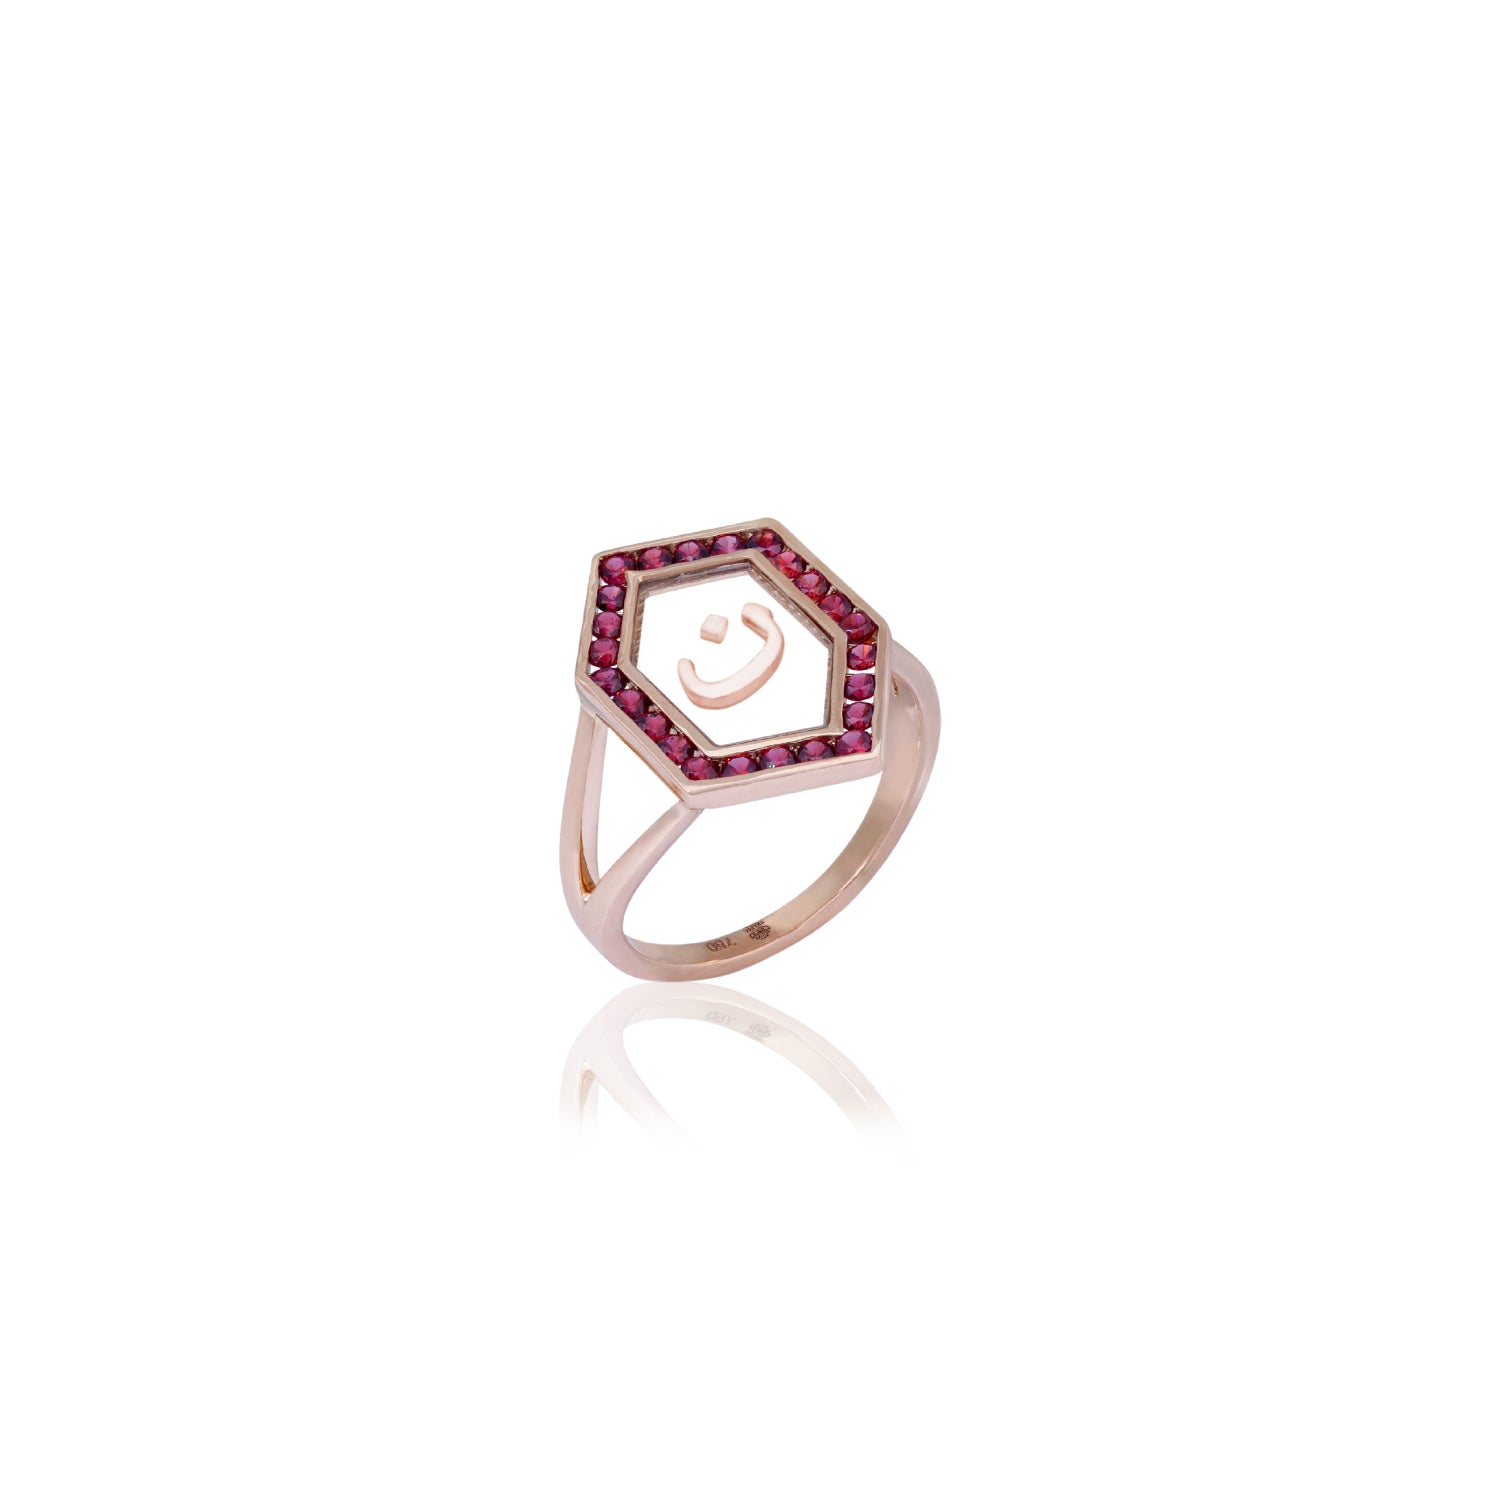 Qamoos 1.0 Letter ن Ruby Ring in Rose Gold